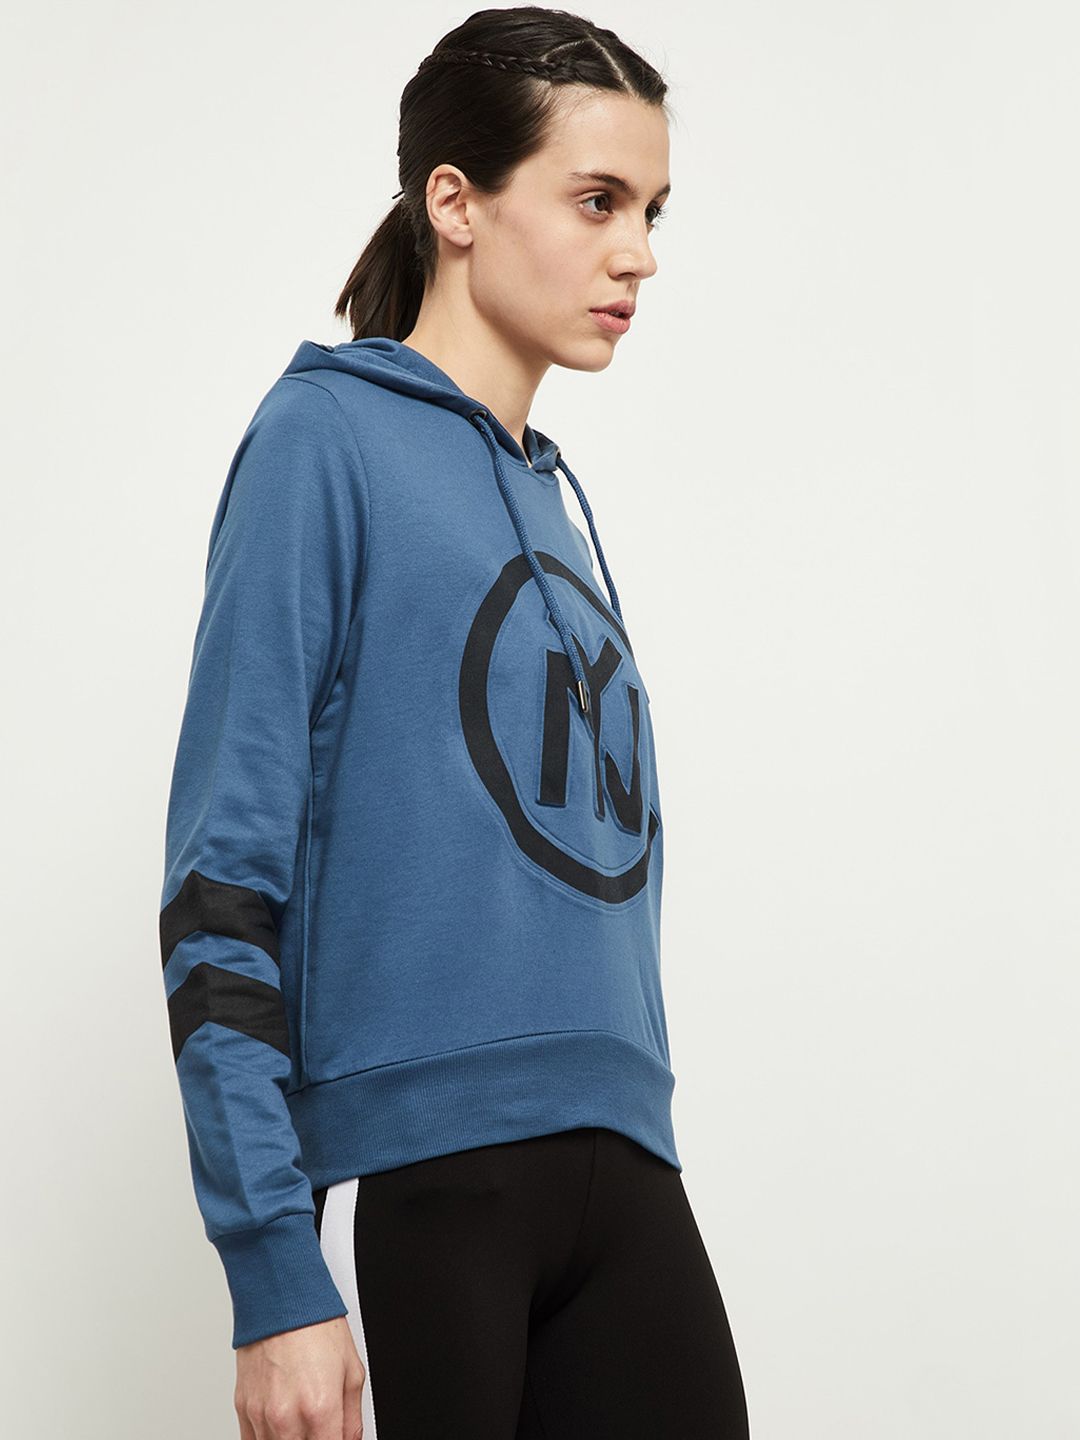 max Women Blue Pure Cotton Hooded Sweatshirt Price in India